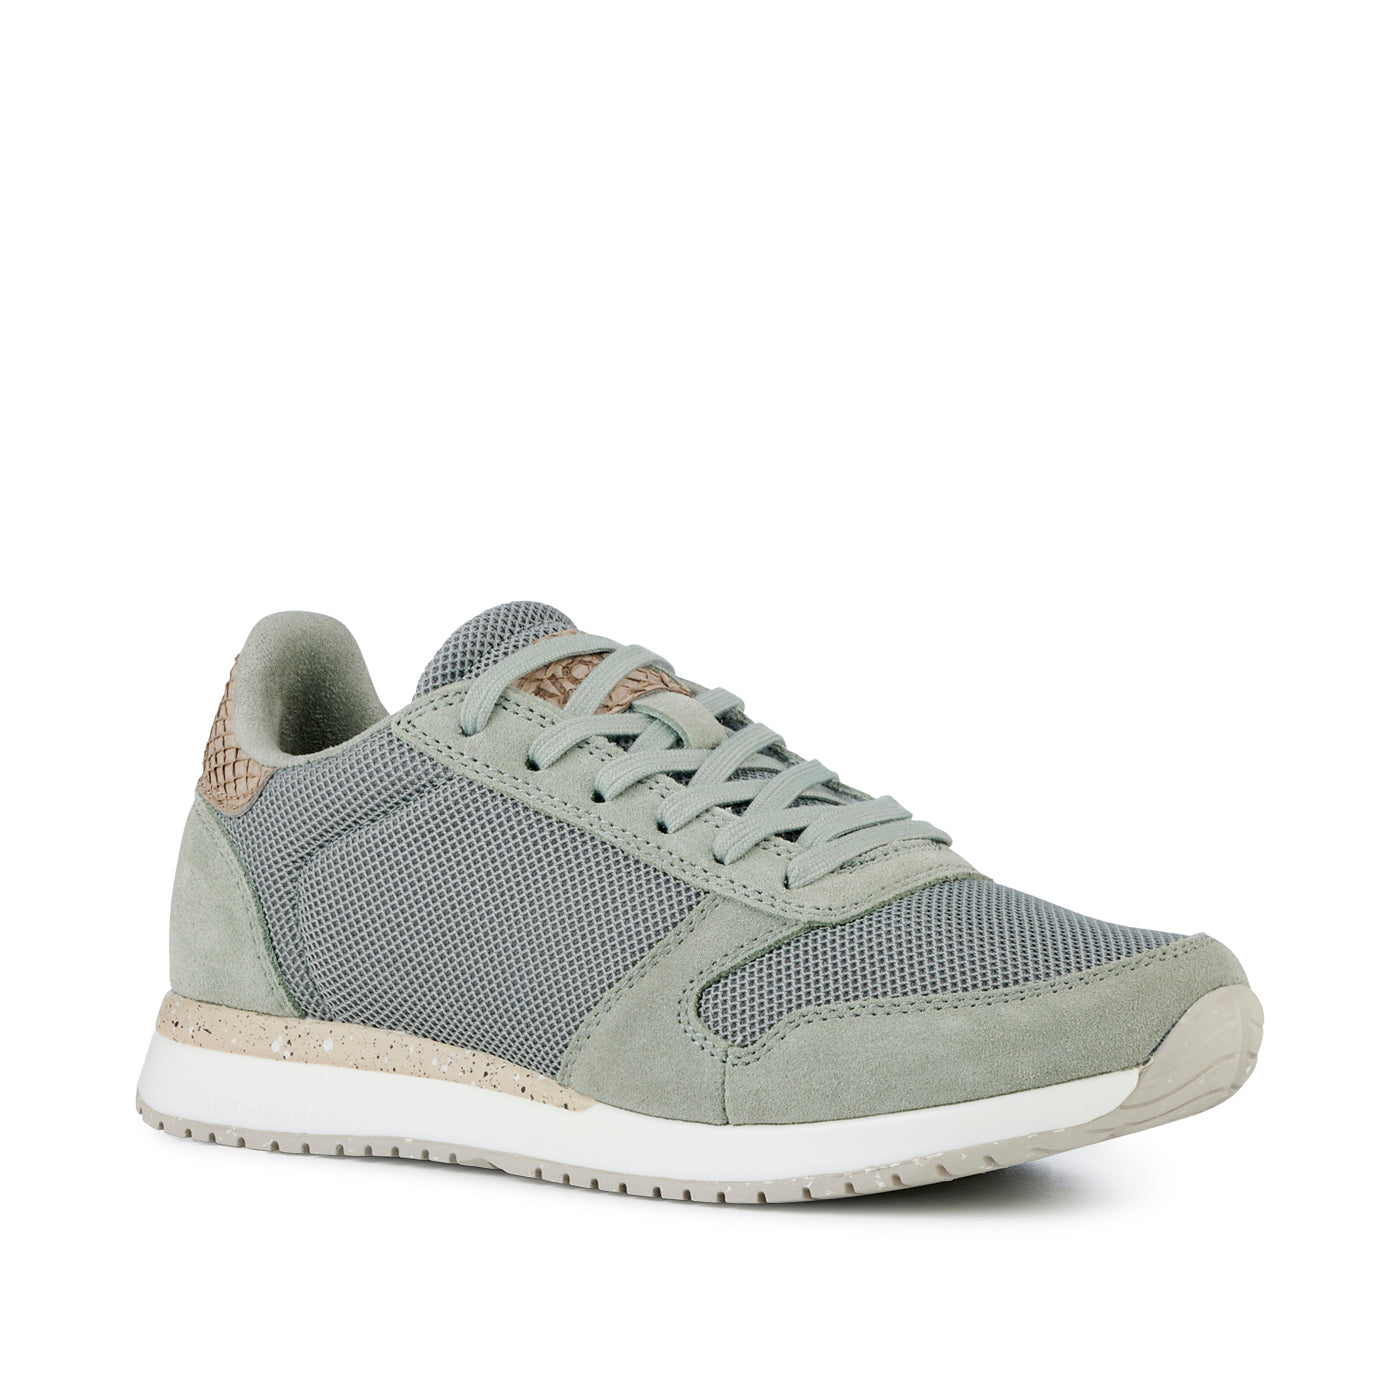 WODEN Ydun Fifty Sneakers 771 Seagrass